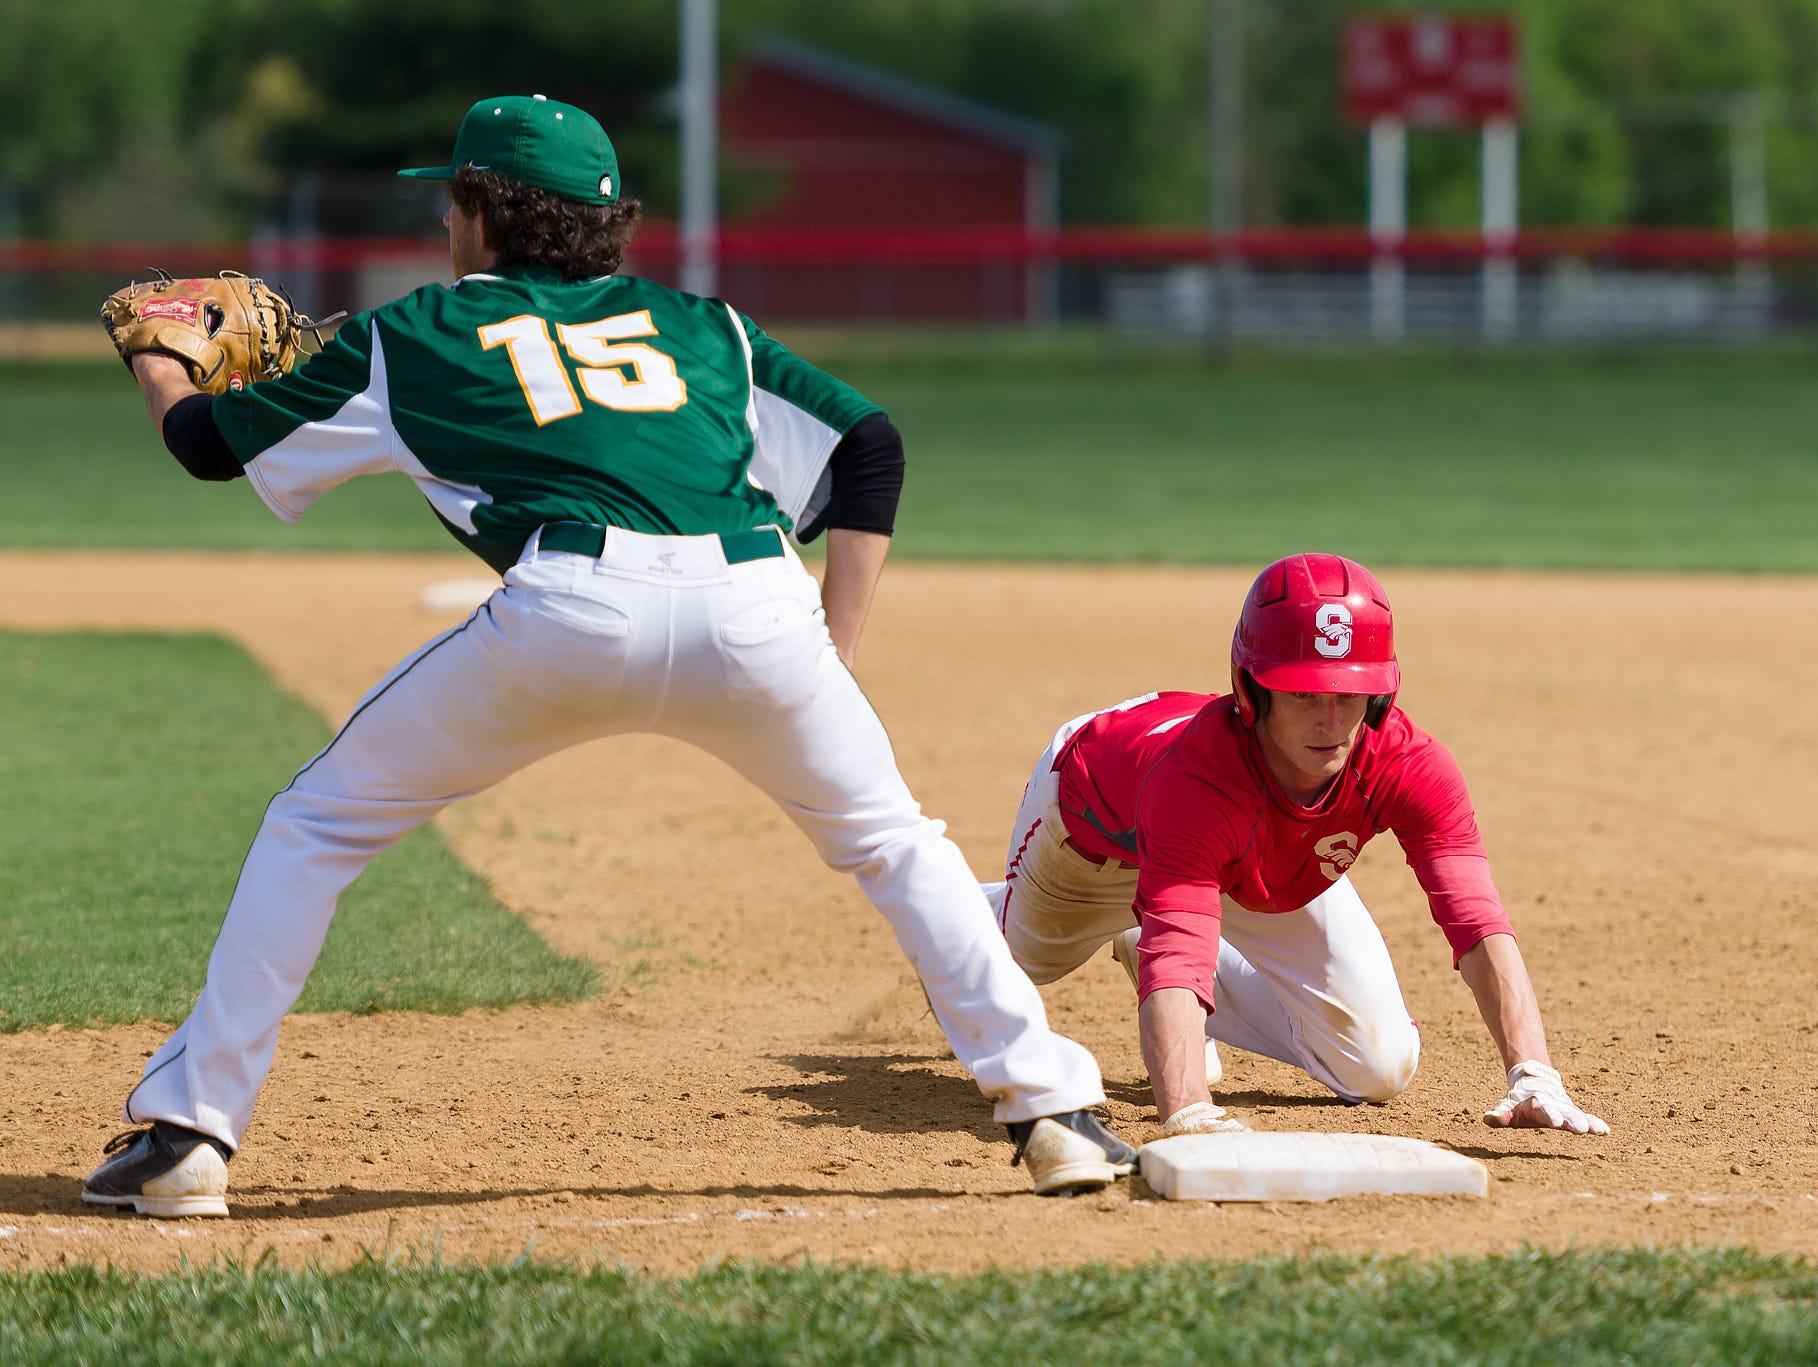 Matthew Theodorakis (15) of St. Mark's misses the tag on Shawn Dulin (2) of Smyrna at first base in a St. Mark's at Smyrna baseball game on Saturday.